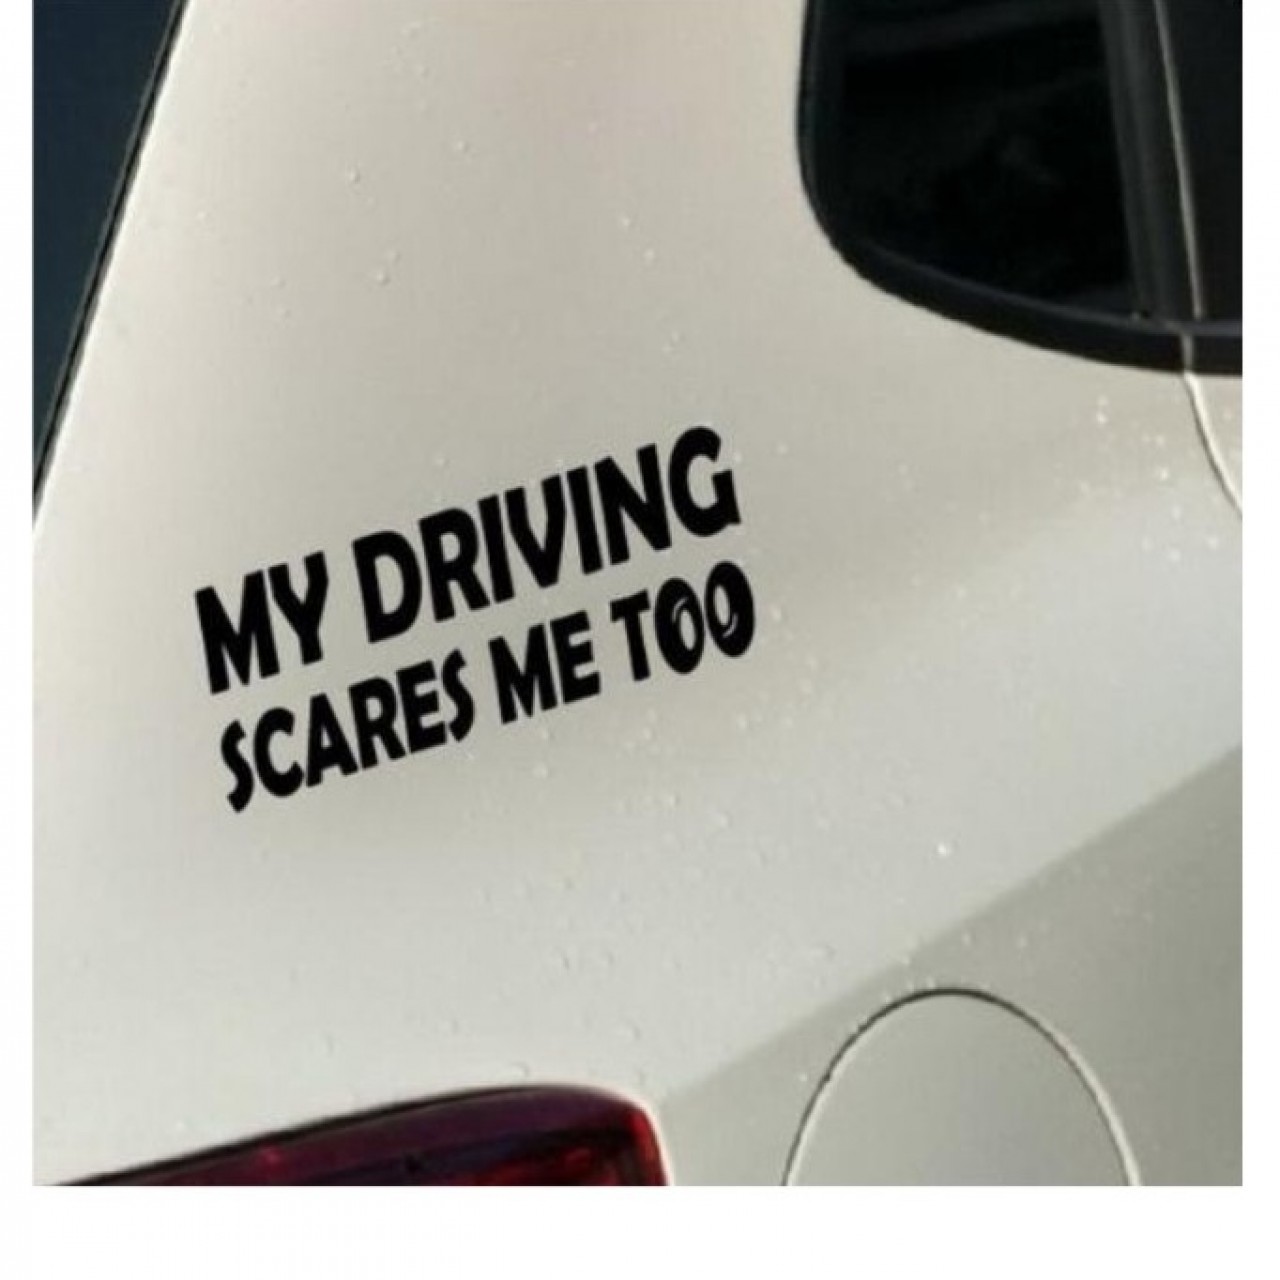 "My Driving Scares Me Too" Auto Car Trunk Thriller Rear Window Body Sticker